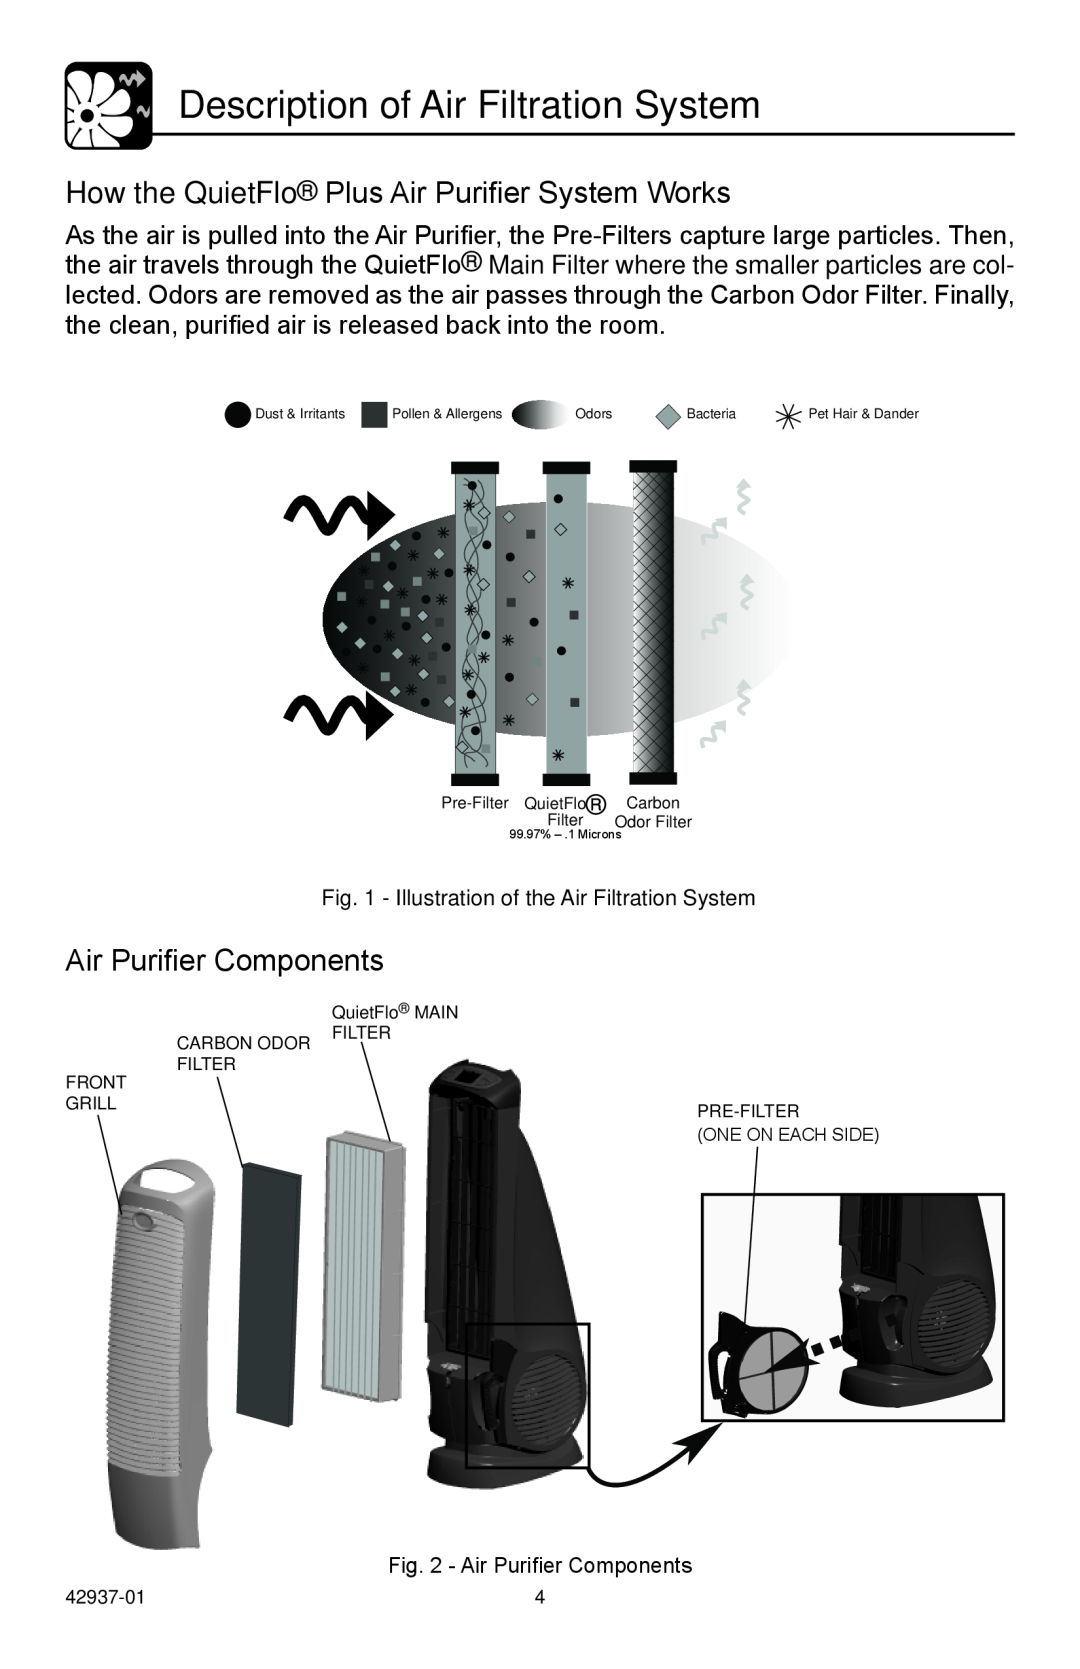 Hunter Fan 30785 manual Description of Air Filtration System, How the QuietFlo Plus Air Purifier System Works 